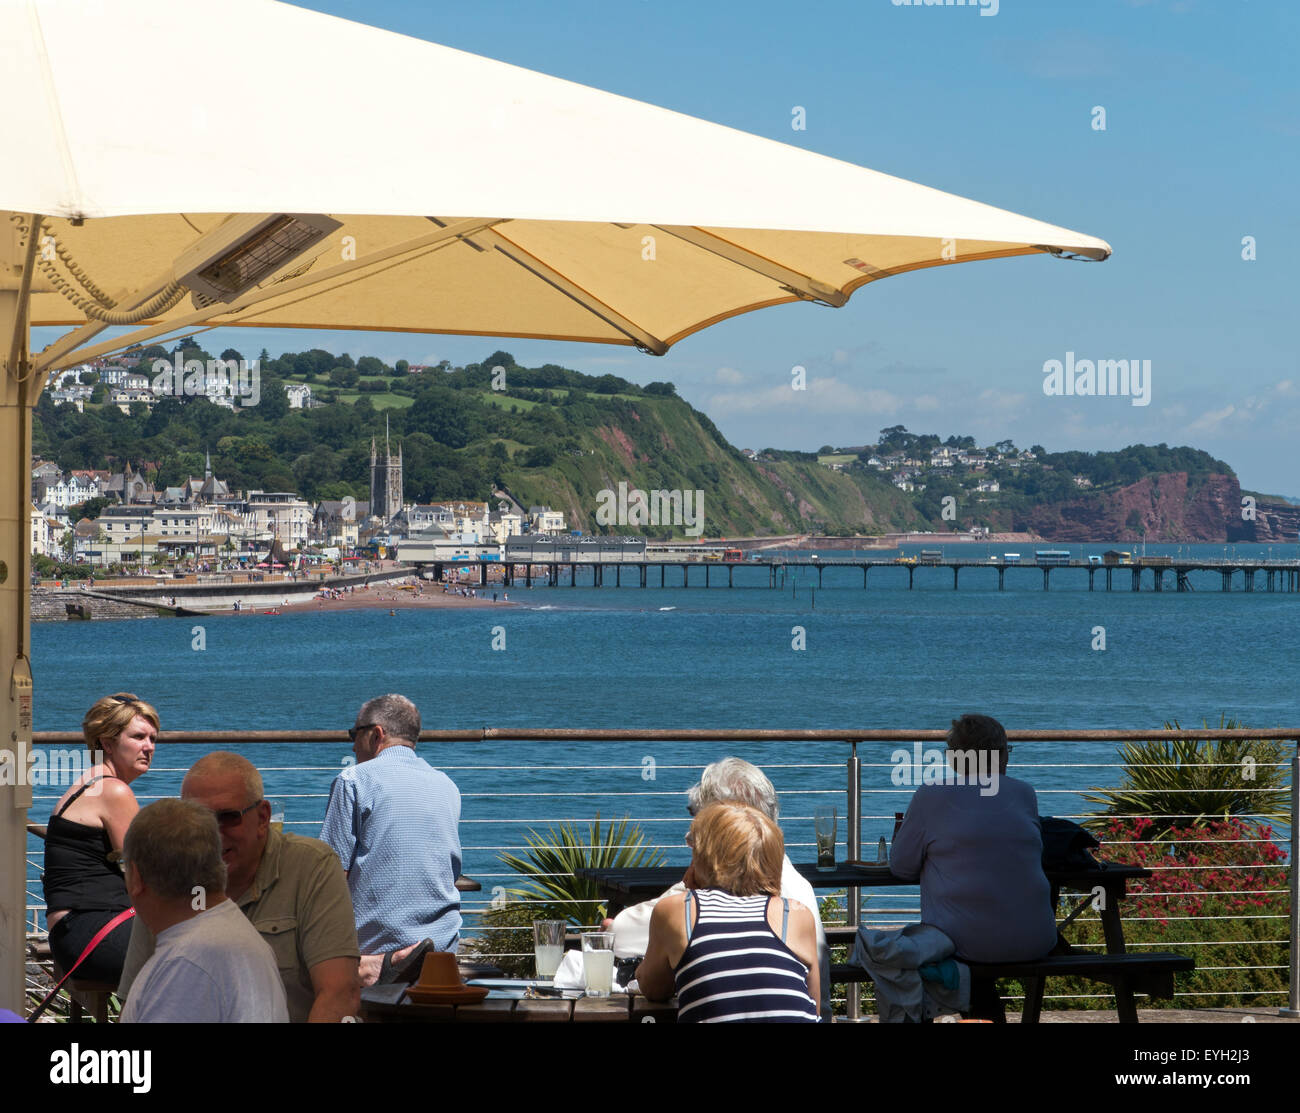 Alfresco Dinning overlooking The Teign Estuary and Teignmouth in Devon, England Stock Photo